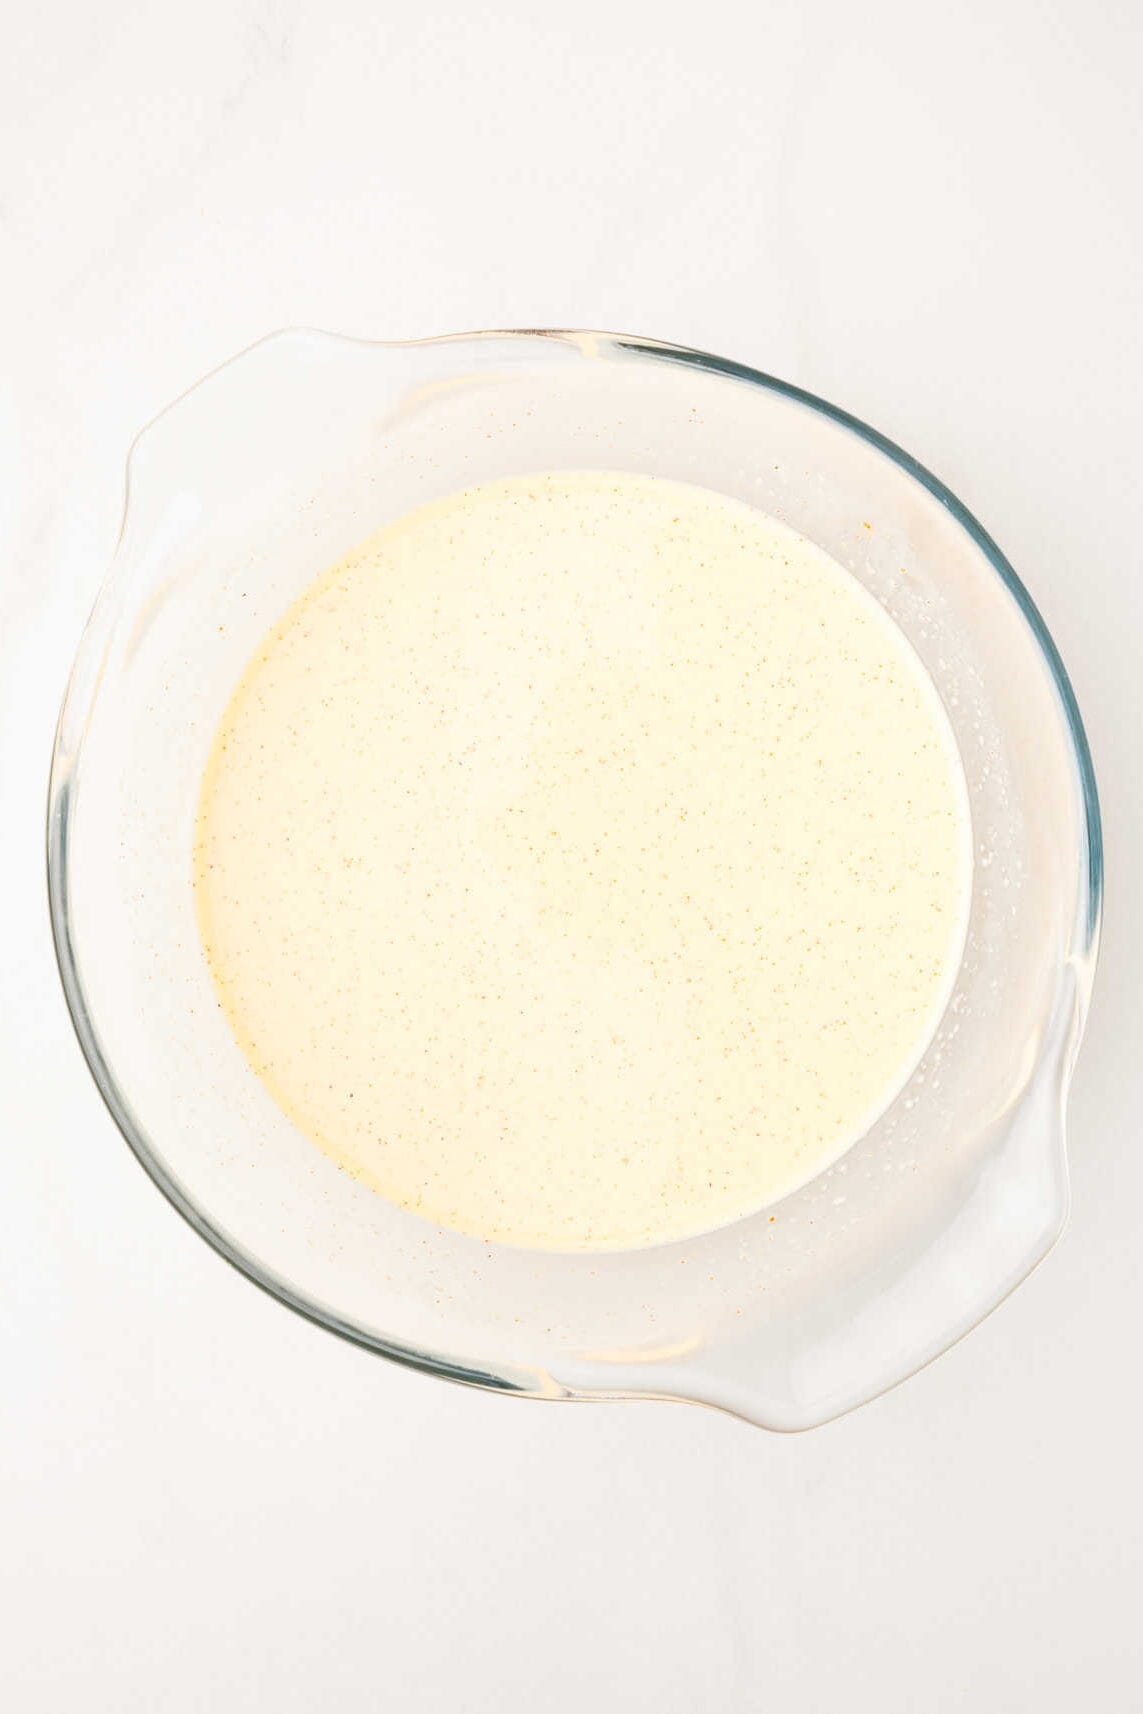 eggs, cream, milk combined in a large glass mixing bowl. 